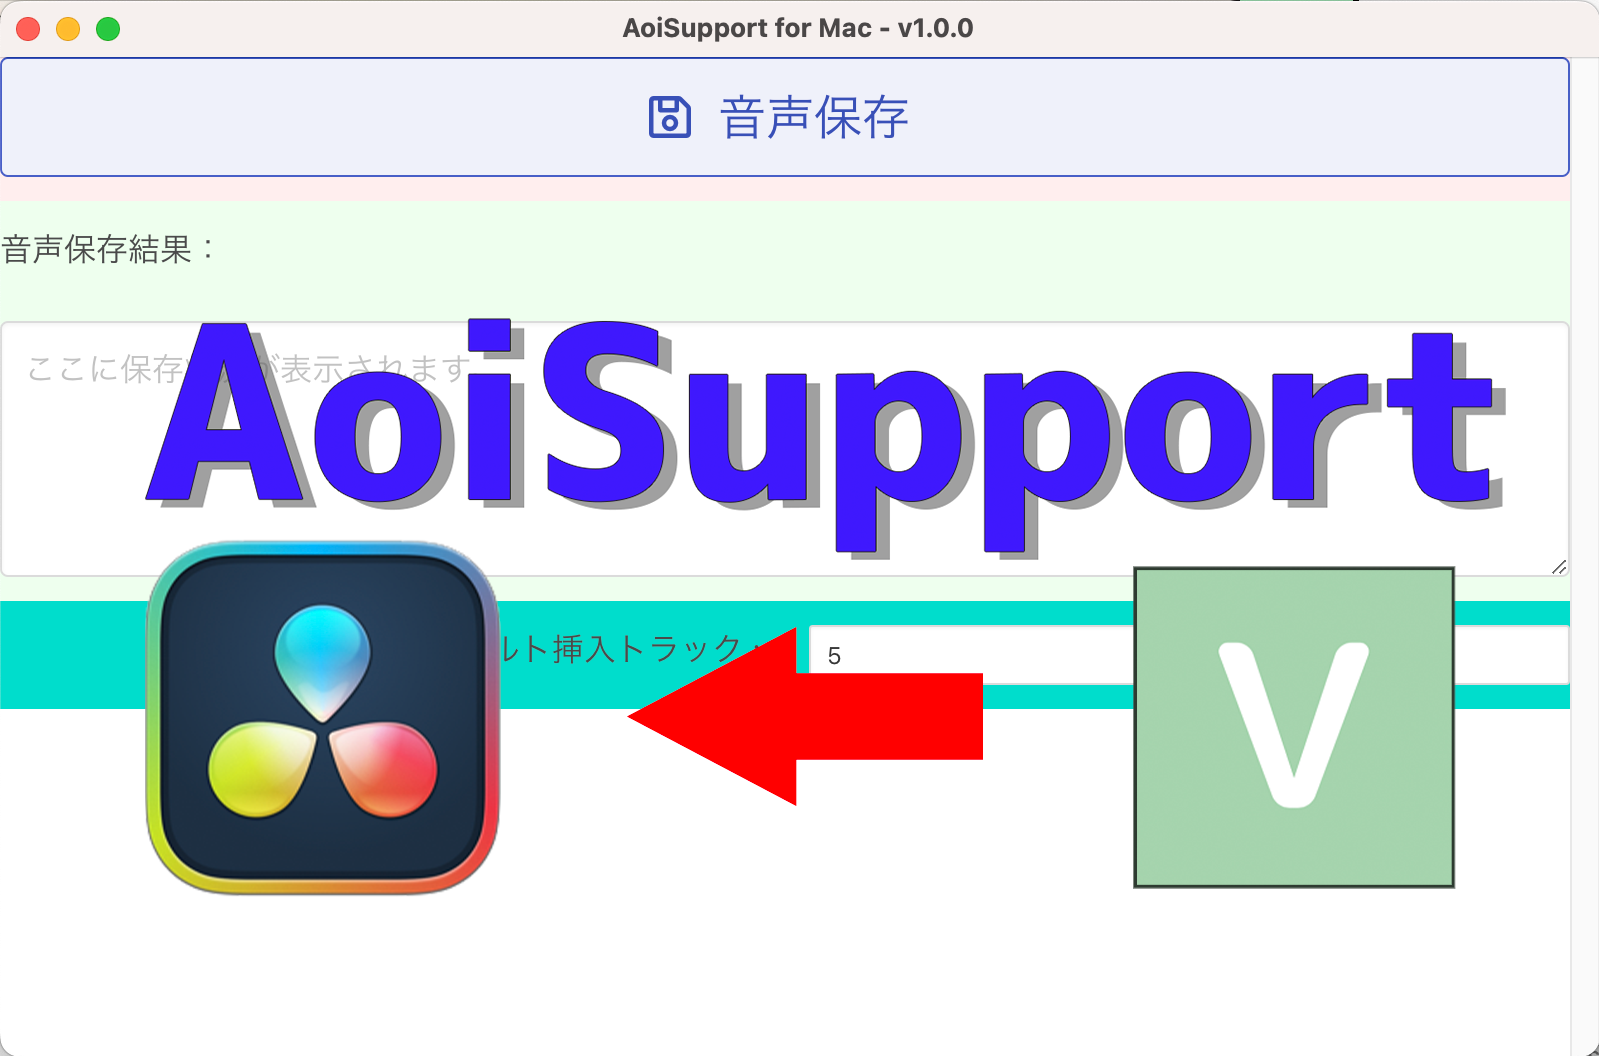 AoiSupport for Mac -音声合成ソフトを利用した動画制作の支援ツール-